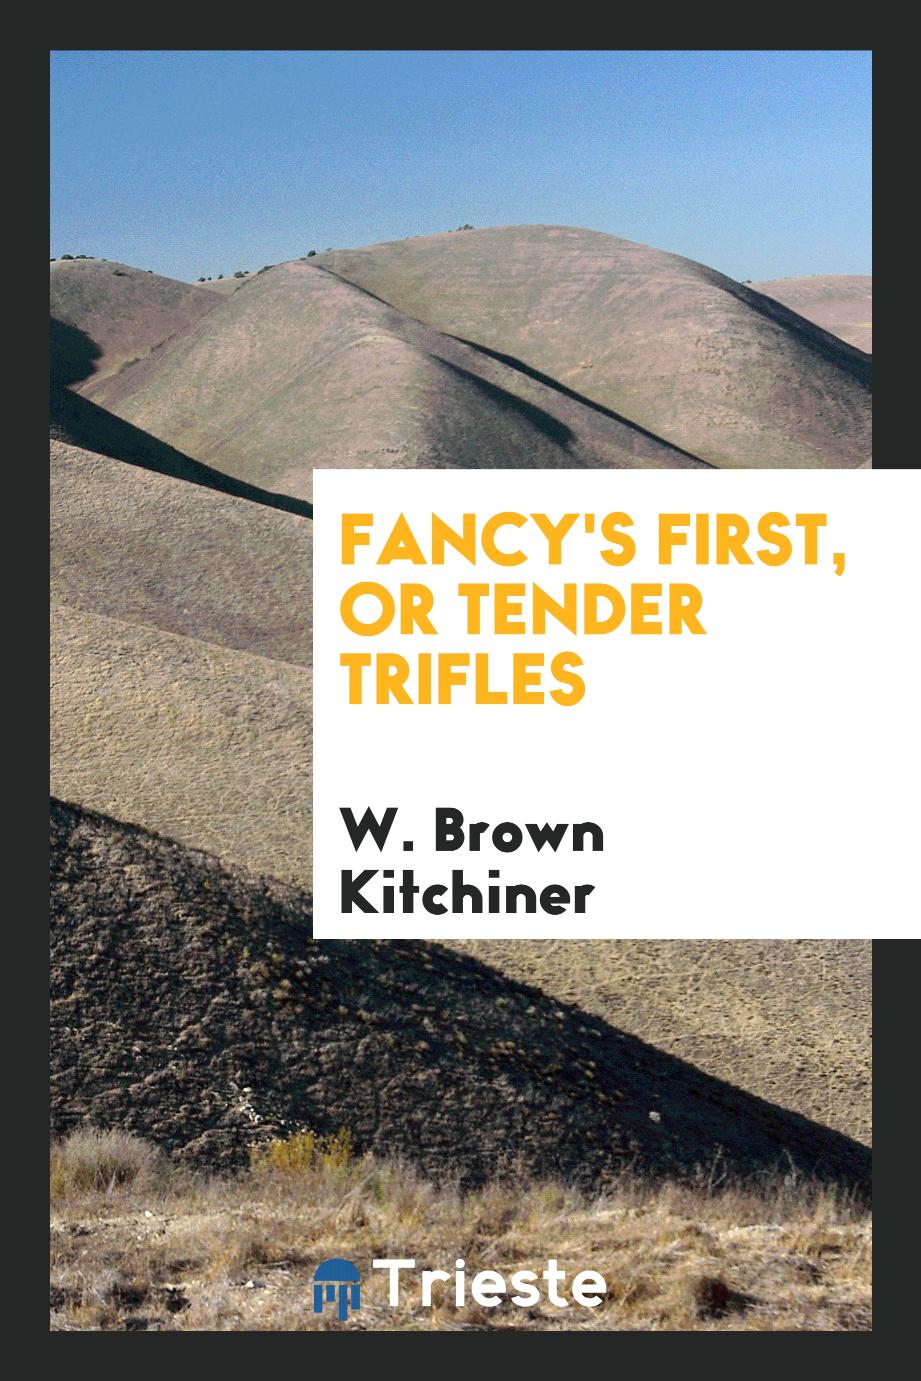 Fancy's First, or Tender Trifles